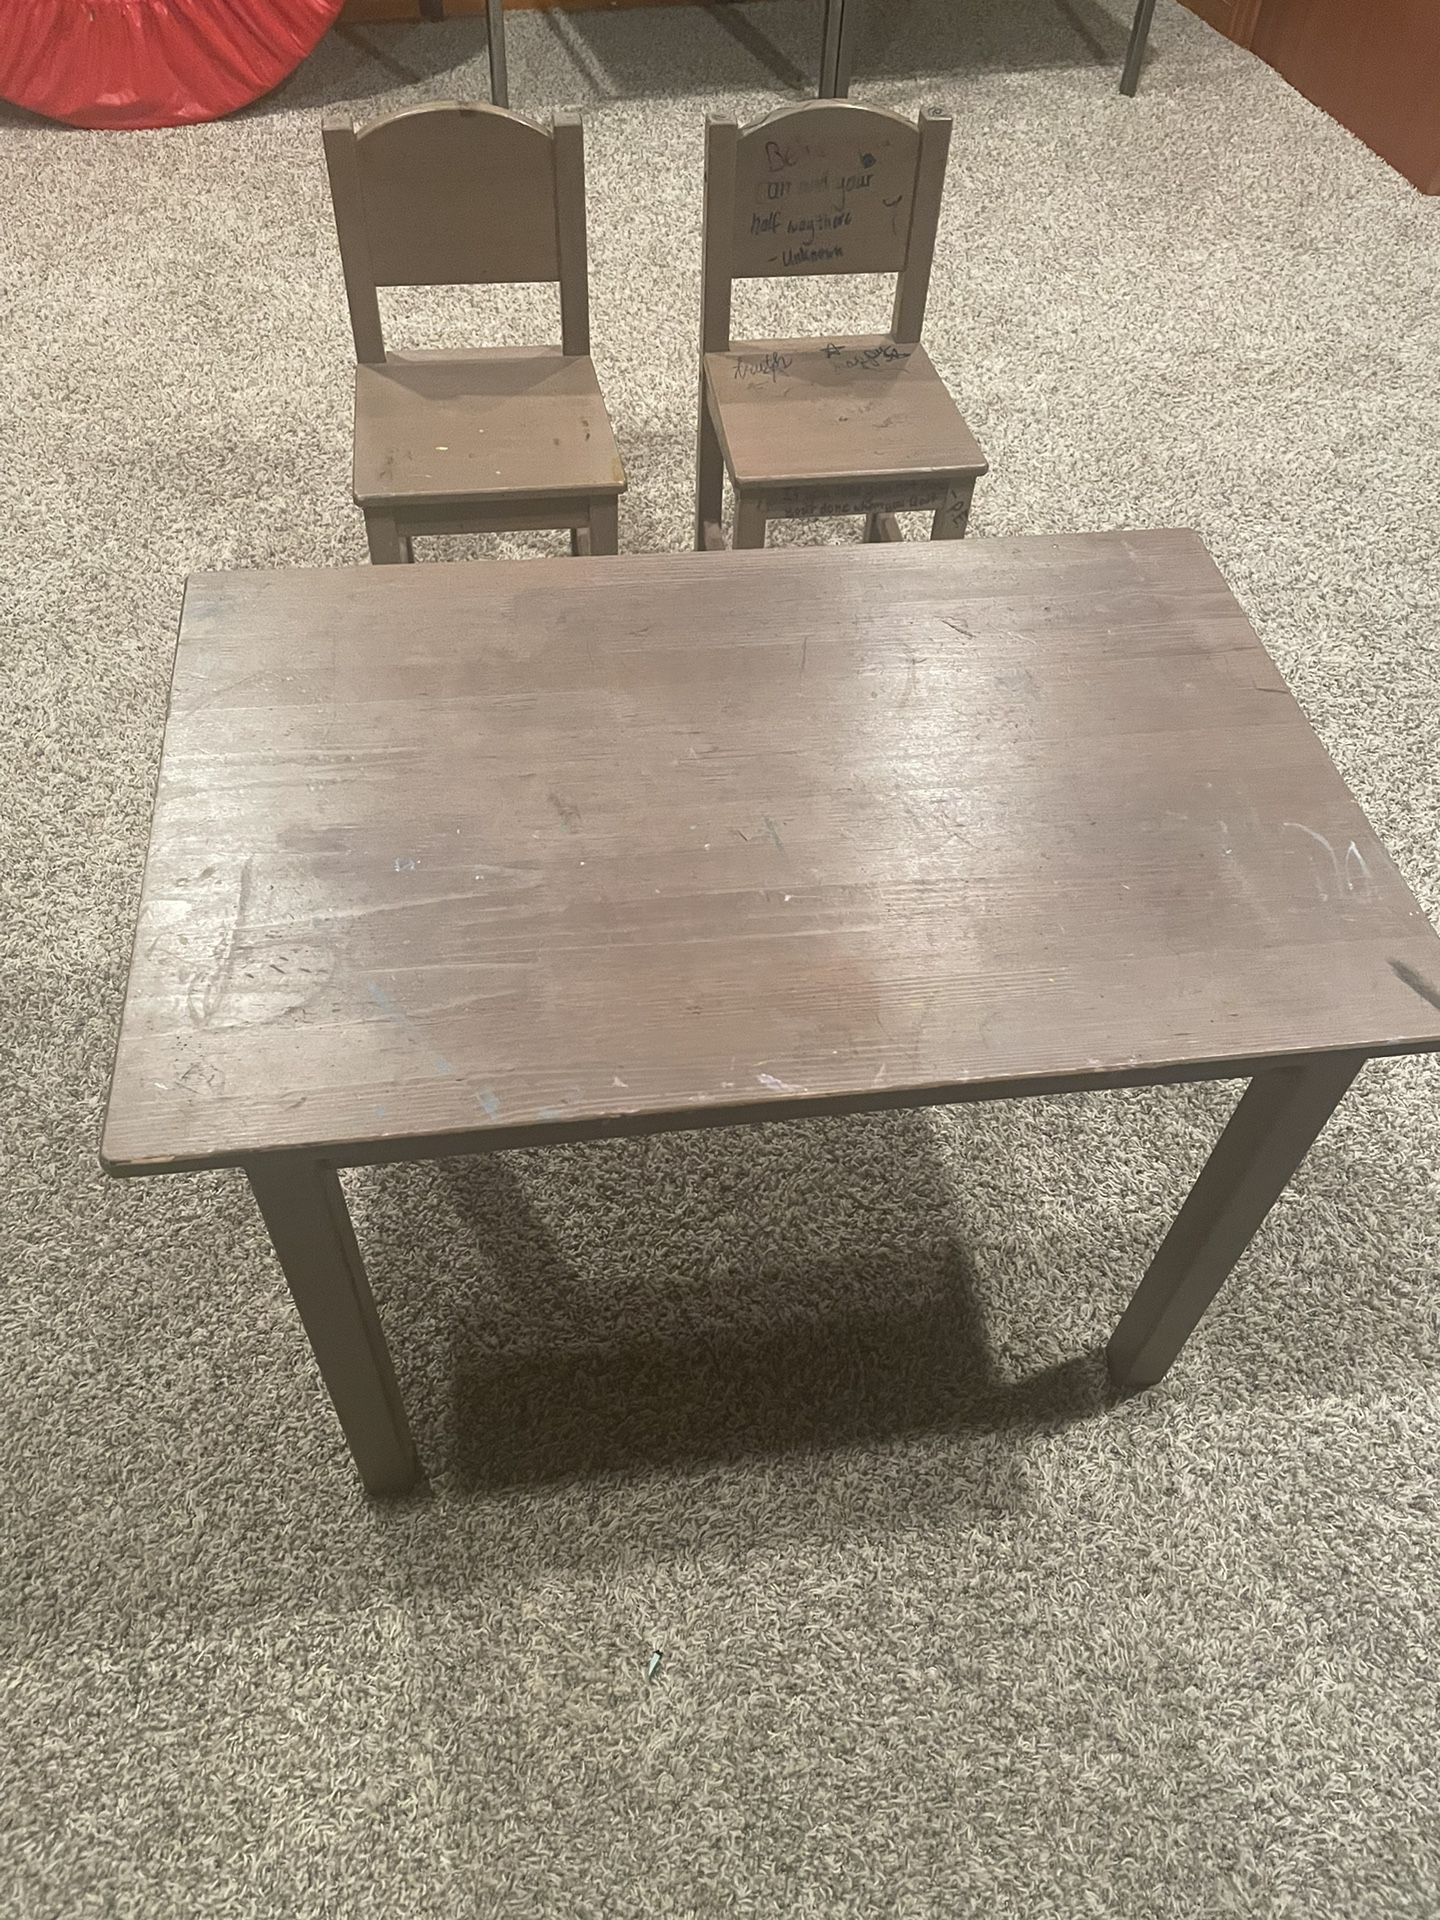 Kids Study Table With 2 Wooden Chairs For $40